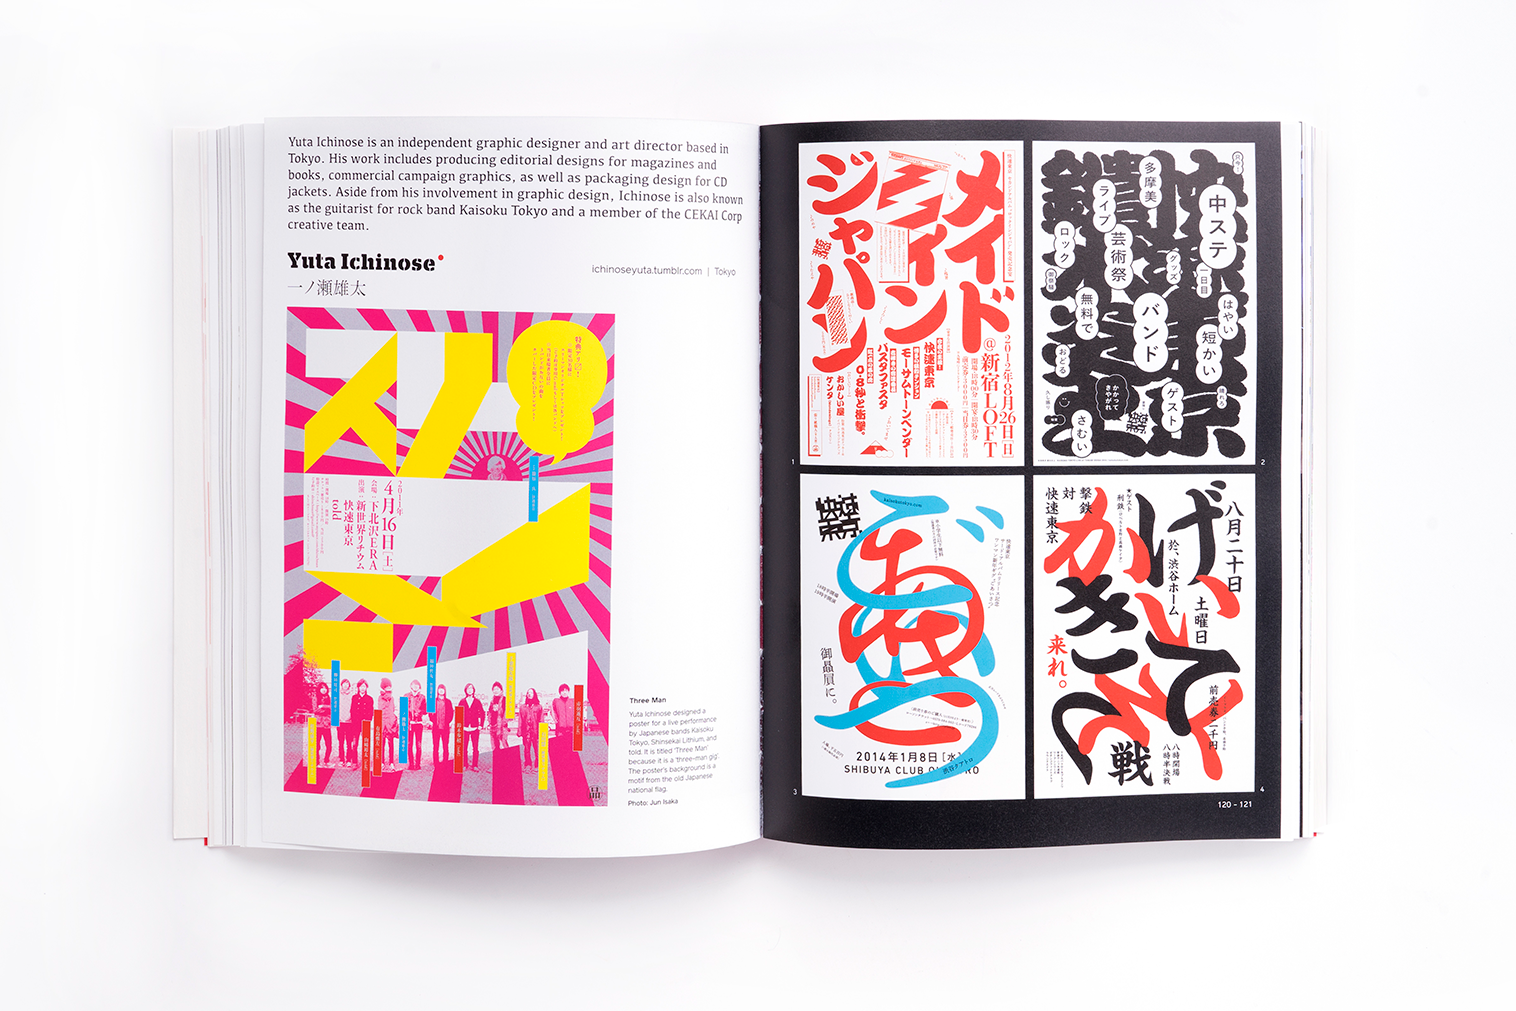 Made in Japan: Awe-inspiring graphics from Japan Today